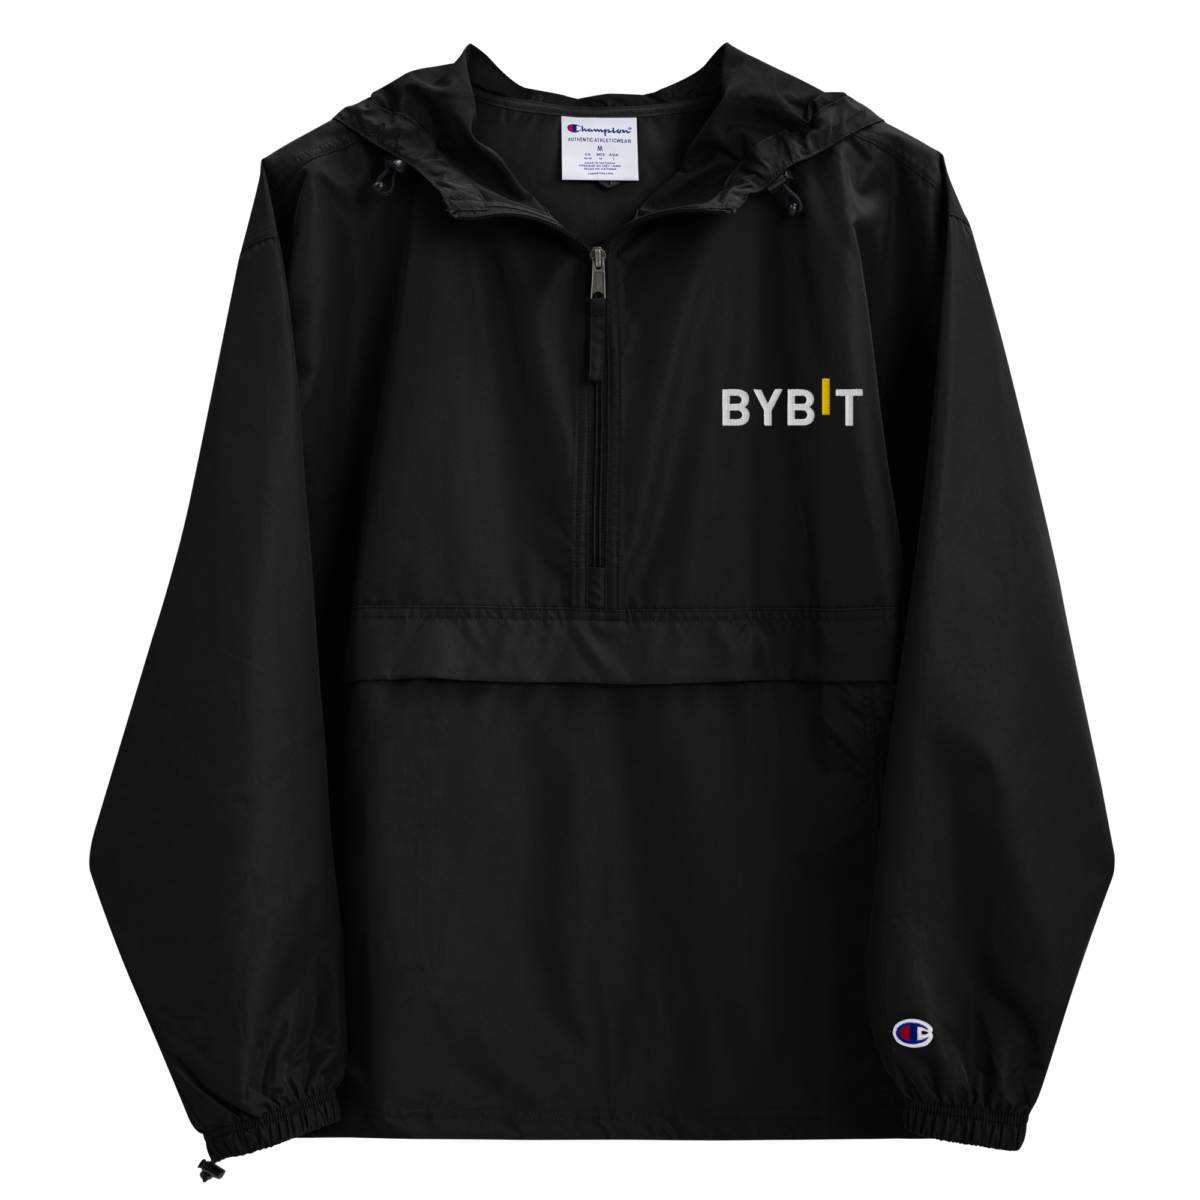 embroidered champion packable jacket black front 6321ec1f24120 - Bybit Champion Packable Jacket